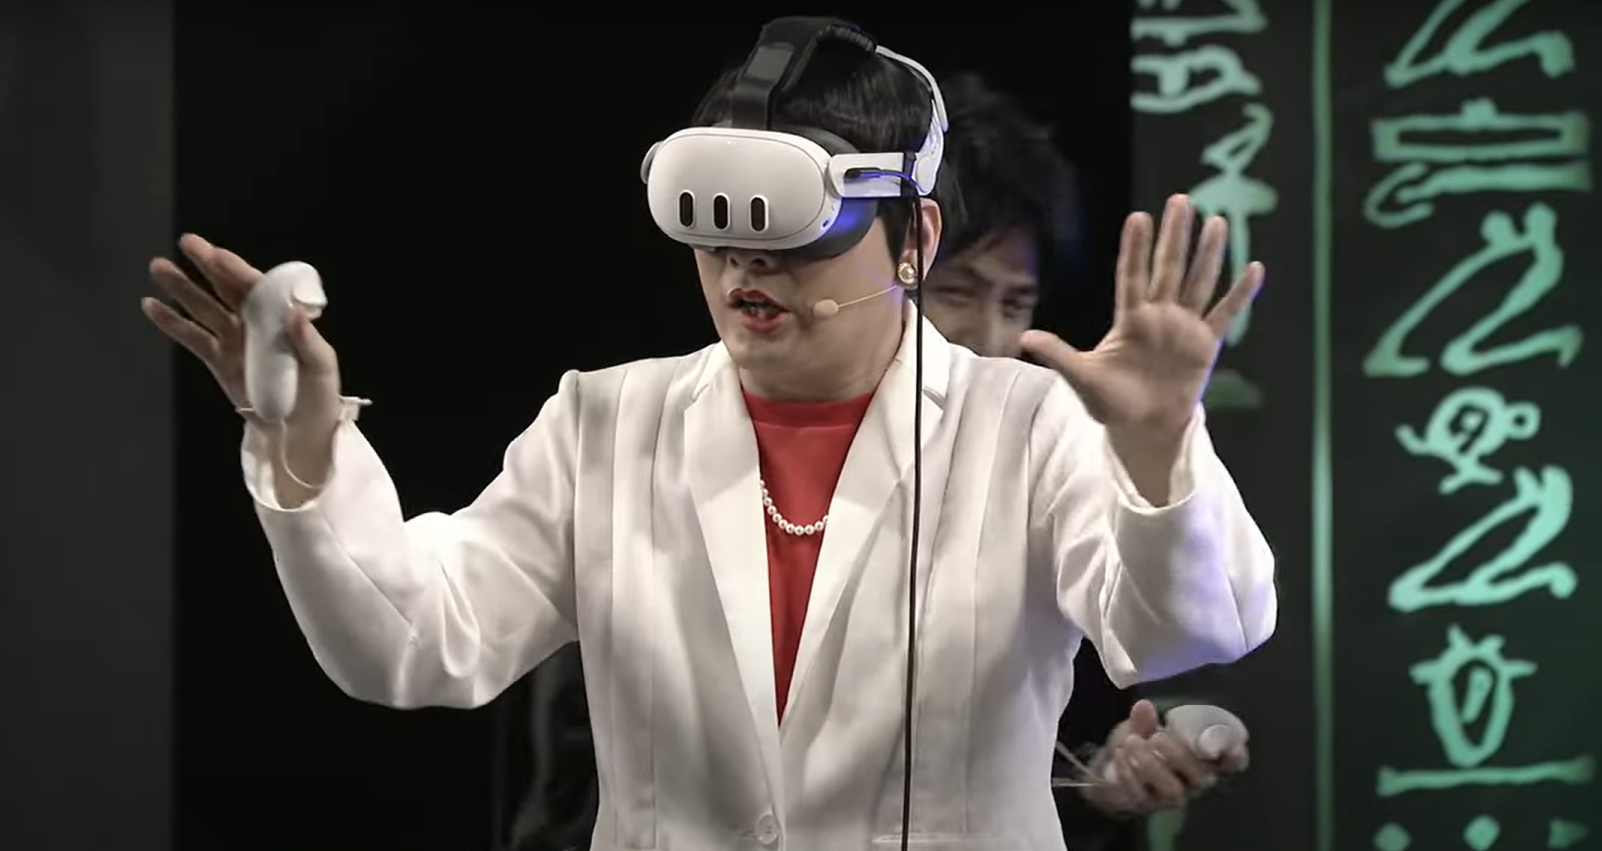 I mean, this dude is literally wearing a Quest 3, so... - Konami teased us with Yu-Gi-Oh! in VR on the Quest 3, but is it really happening this time?